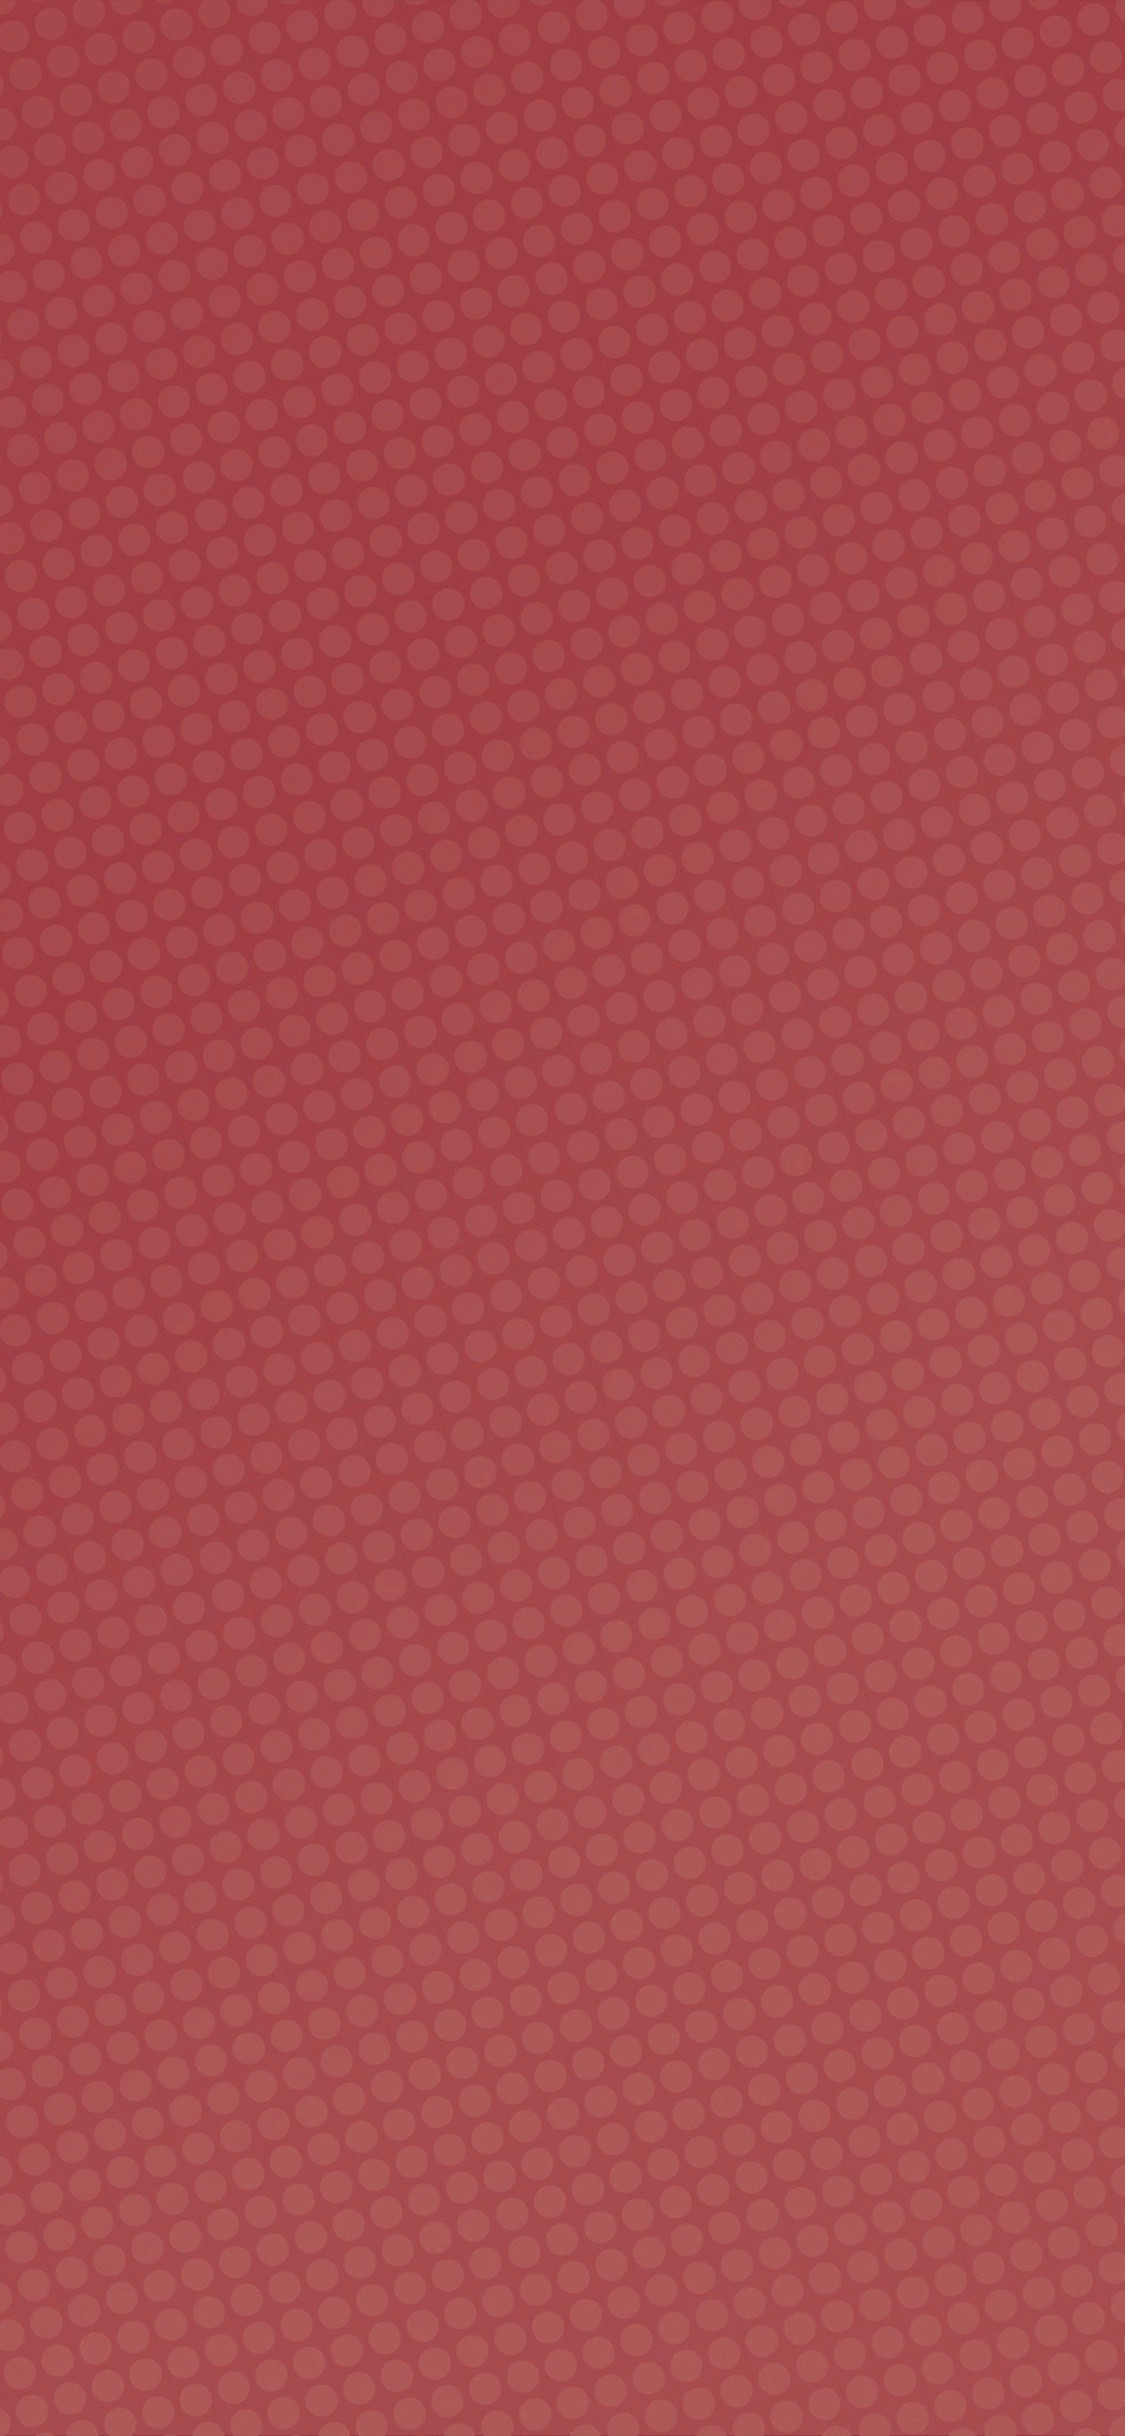 1125x2436 pattern. Download iPhone wallpaper! iPhone X